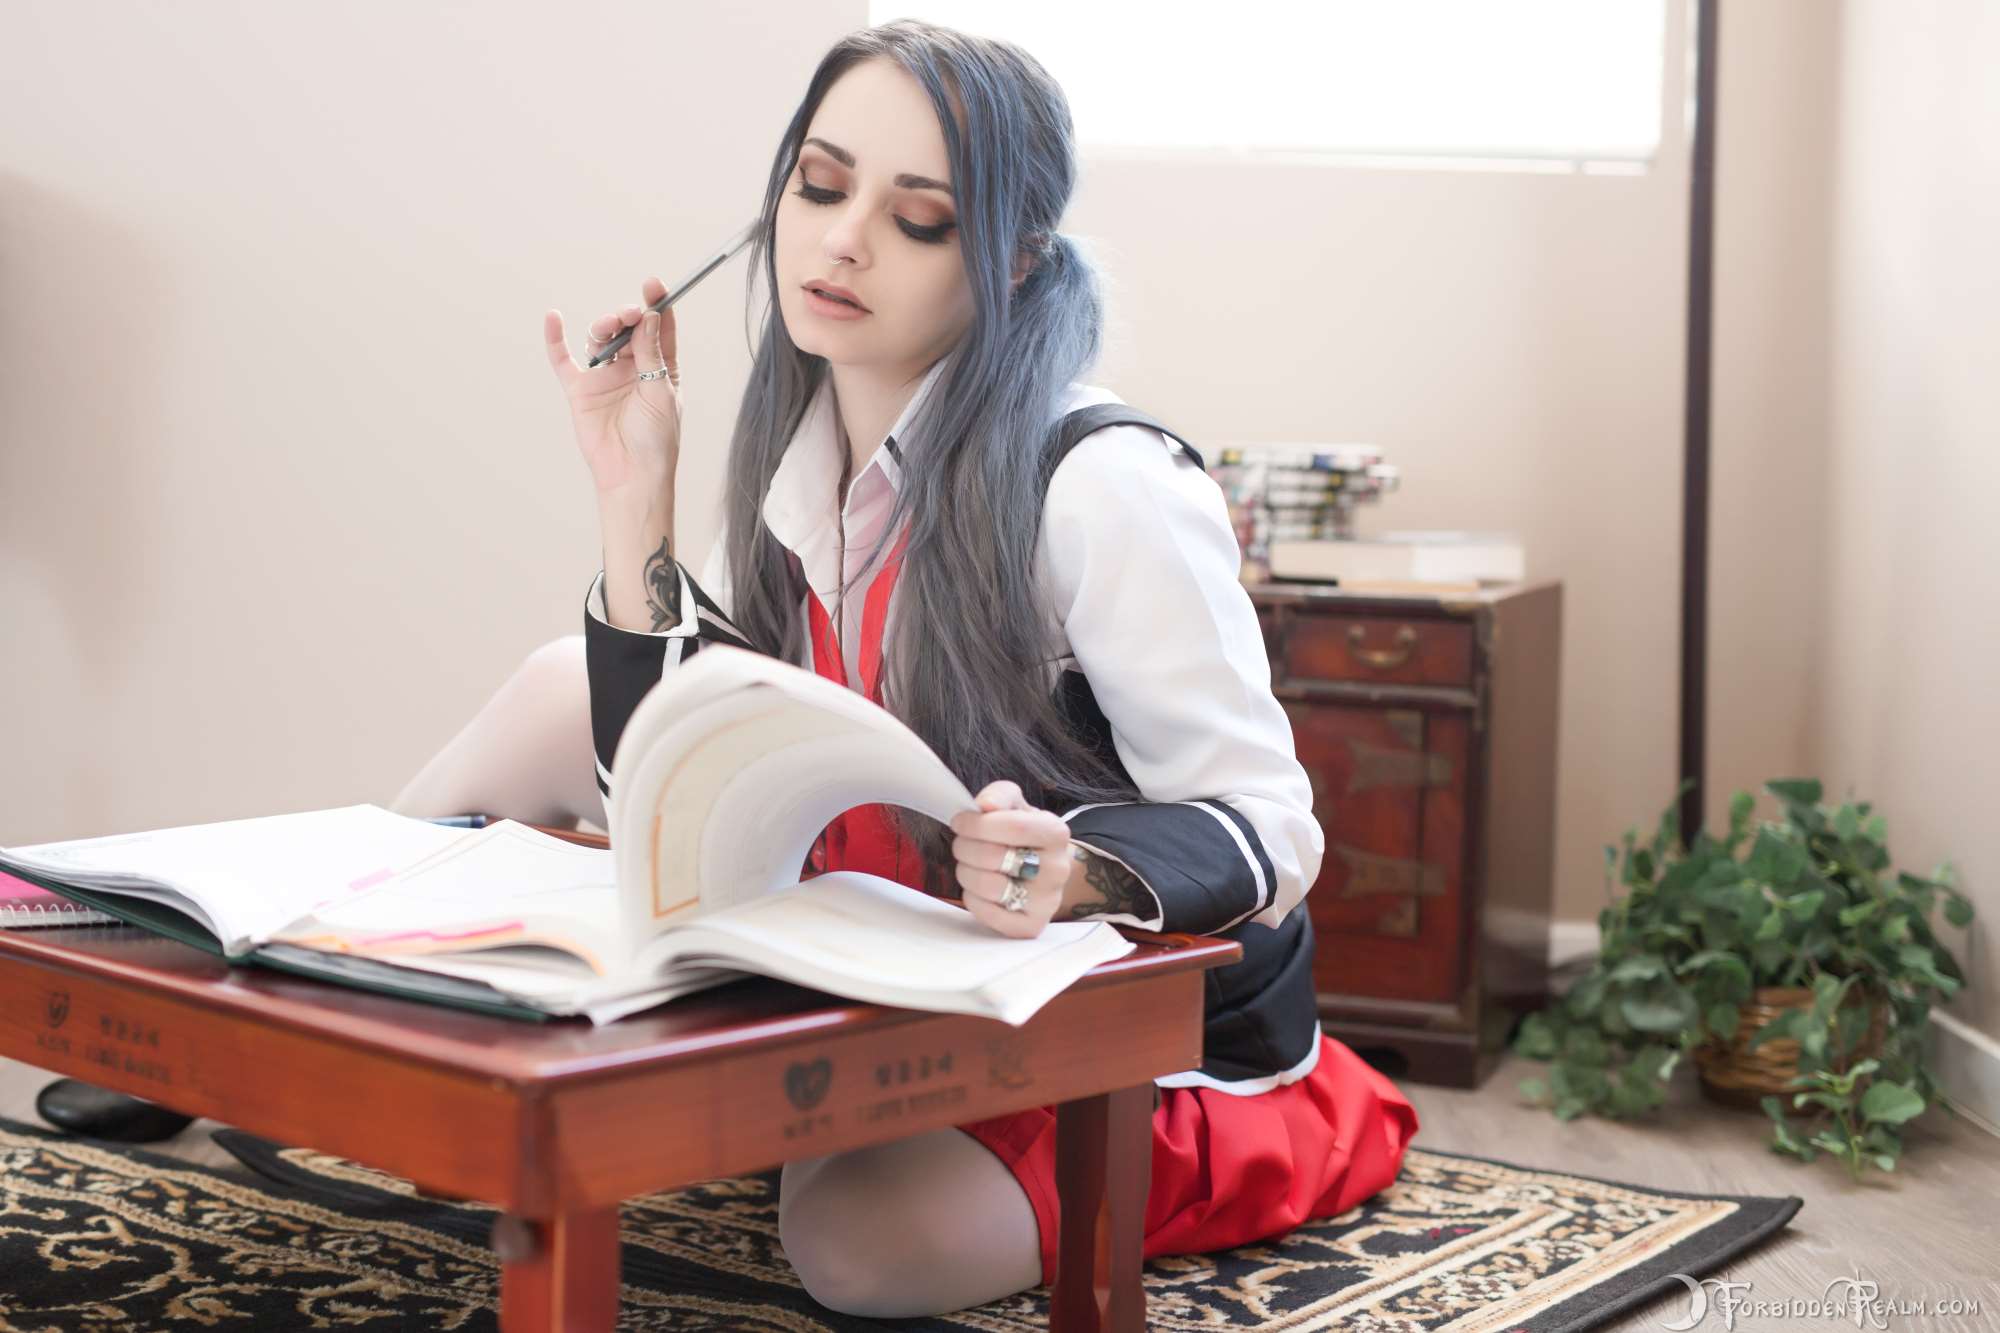 Model Tattoo Students Studying Silver Hair Thigh Highs 2000x1333